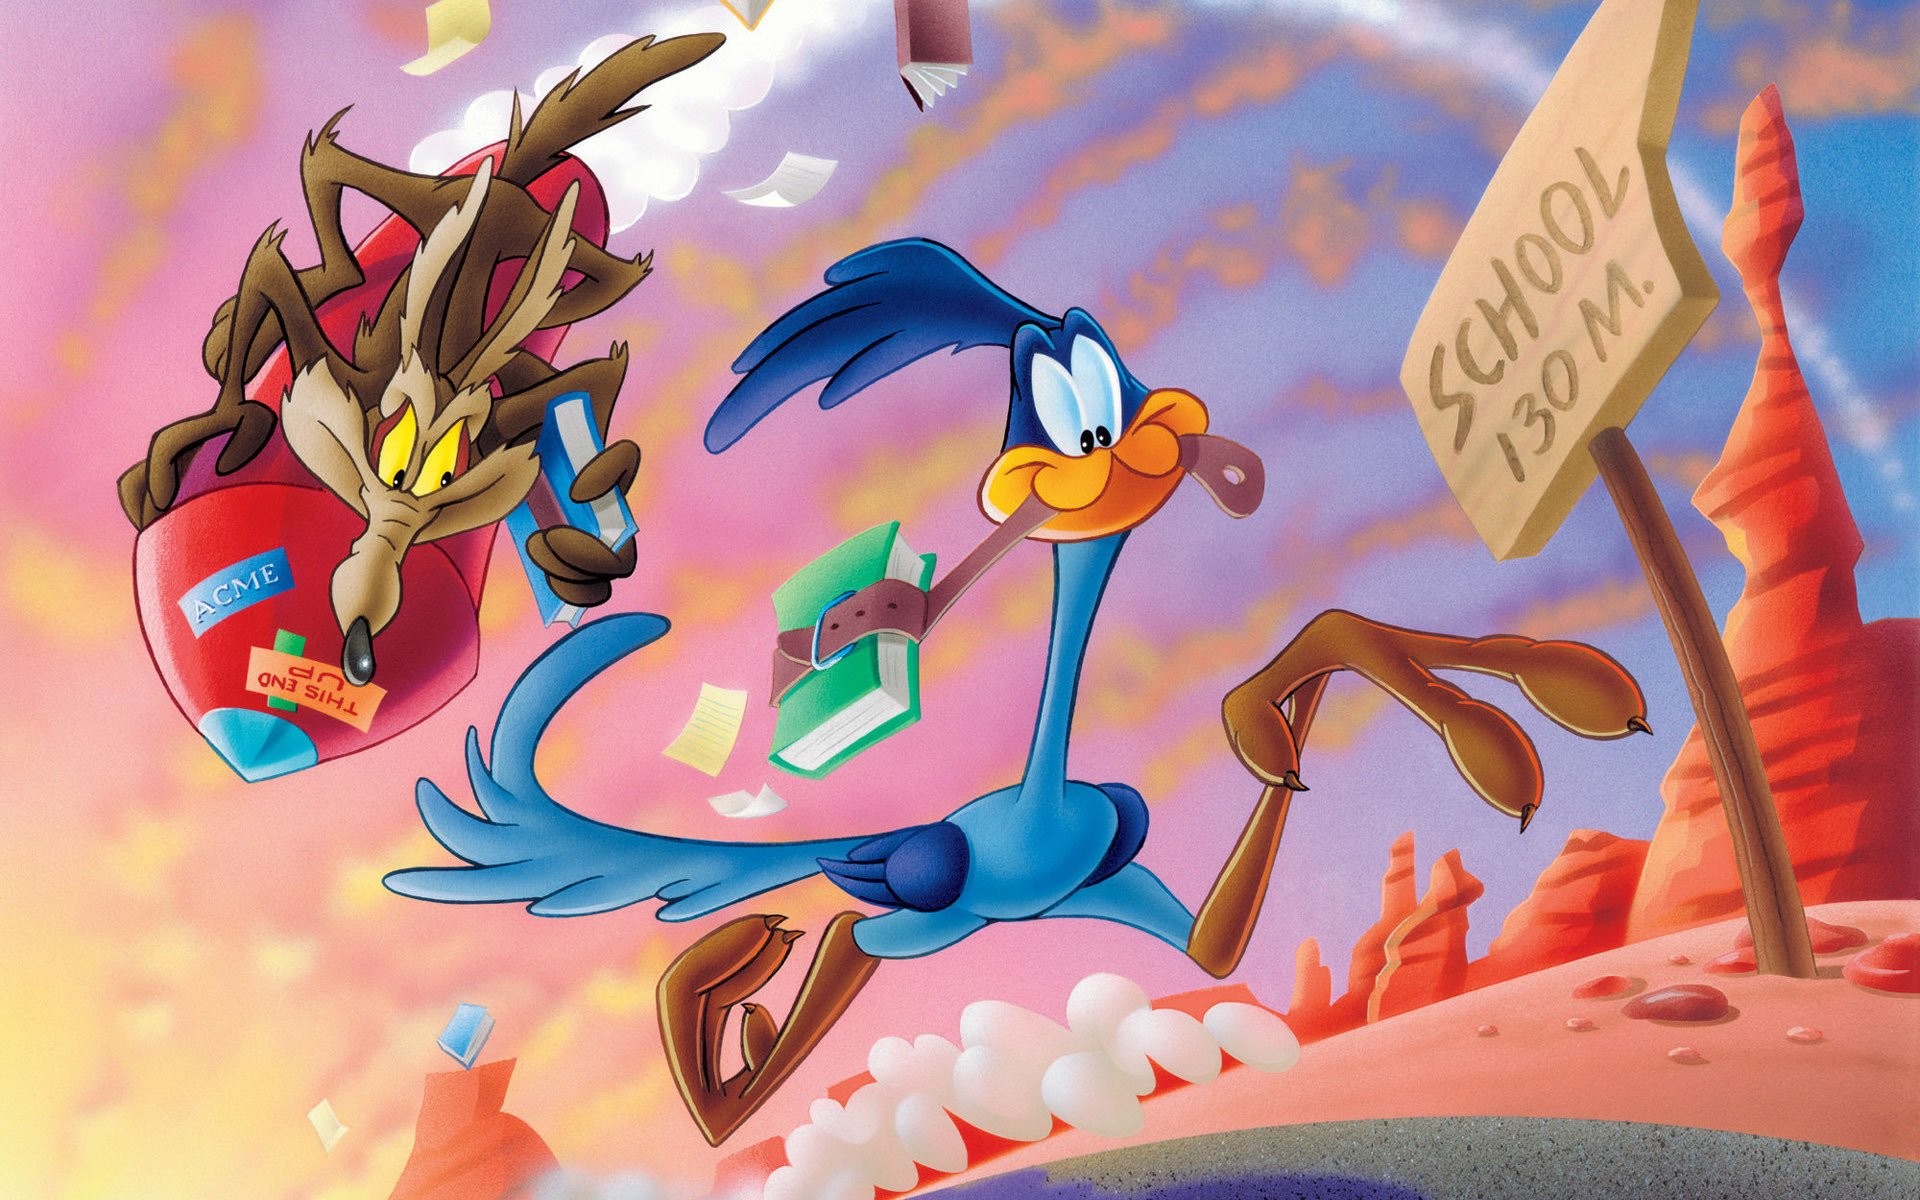 1920x1200 Wile E. Coyote and The Road Runner Wallpaper 1 - 1920 X 1200